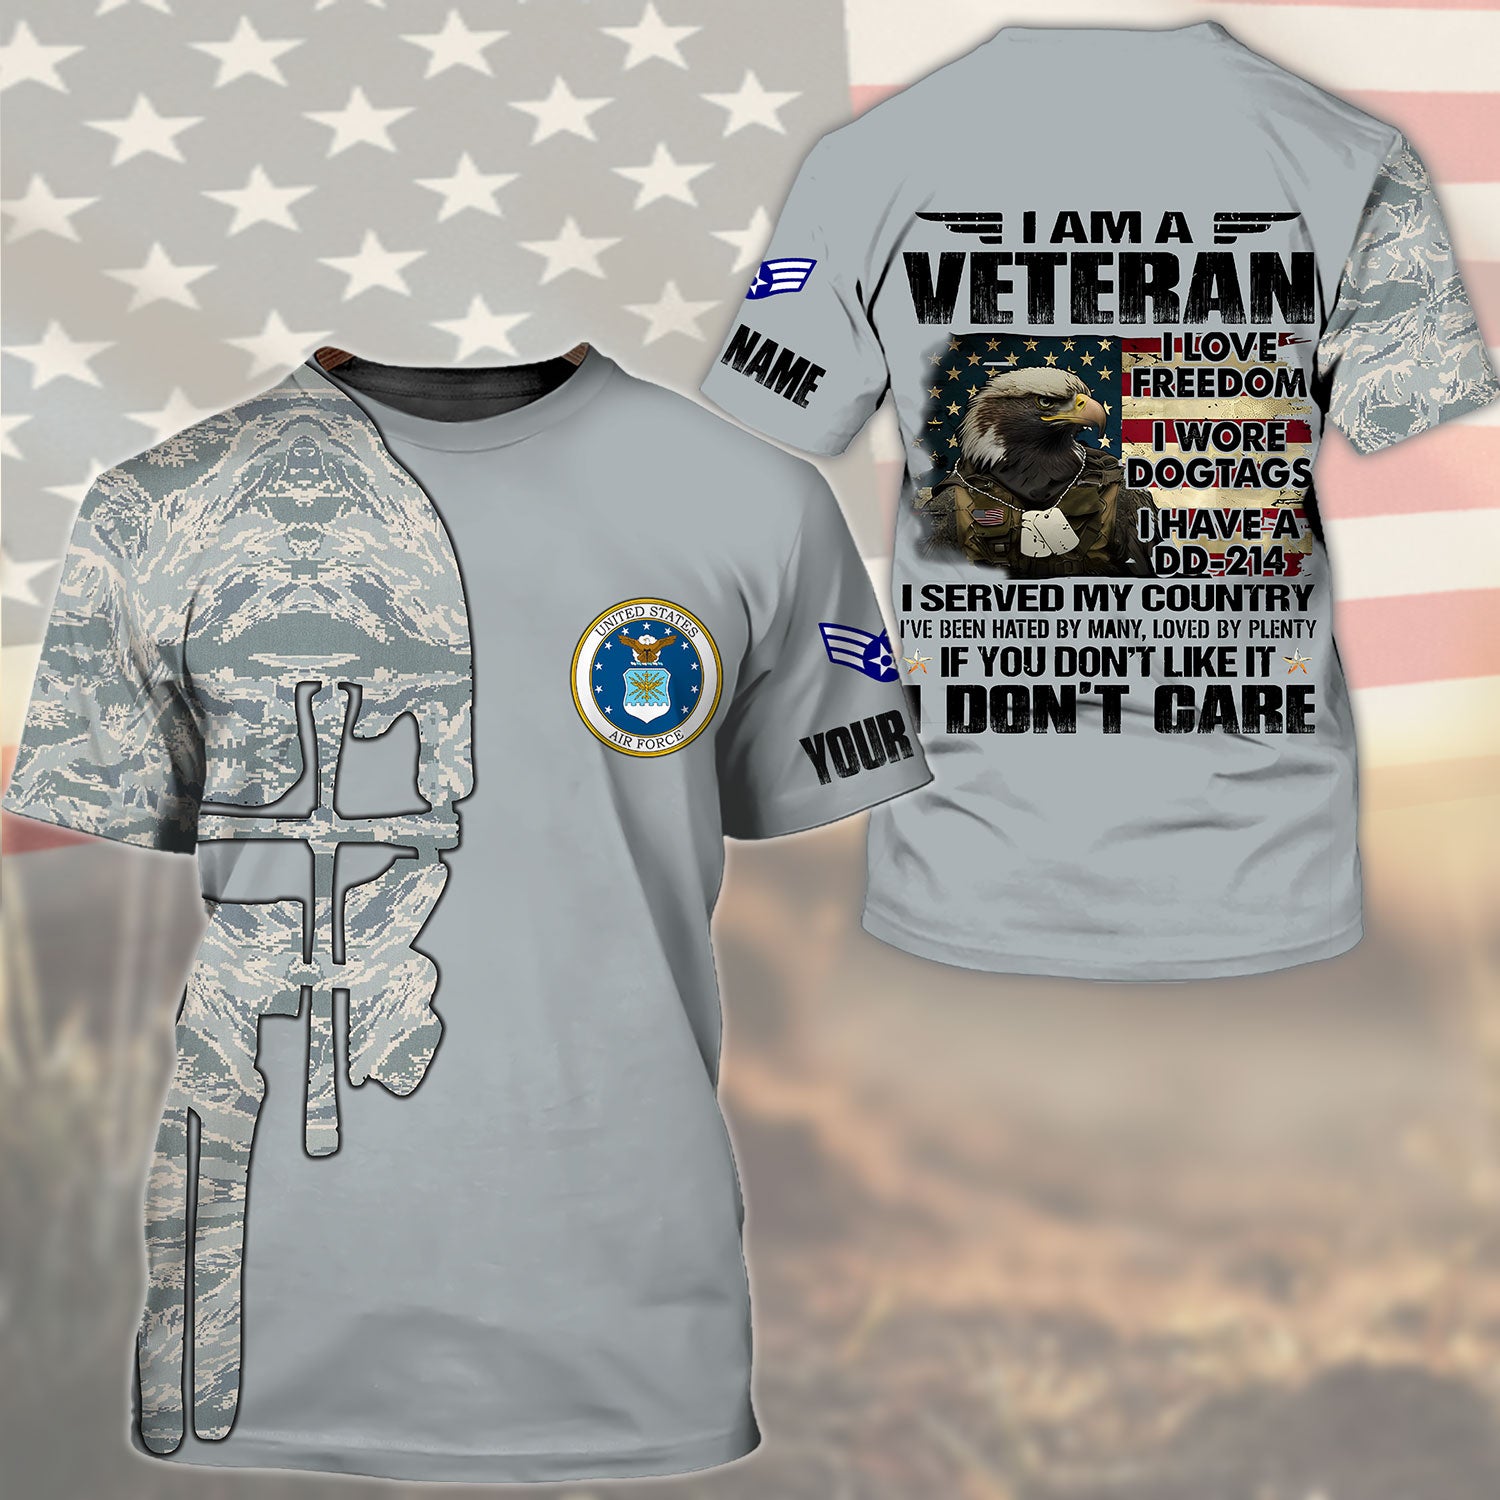 I Am Veteran - I love Freedom - I Wore Dogtags - I Have A DD-214 - Customized U.S. Veteran Air Force T-Shirt, Gift For Veterans